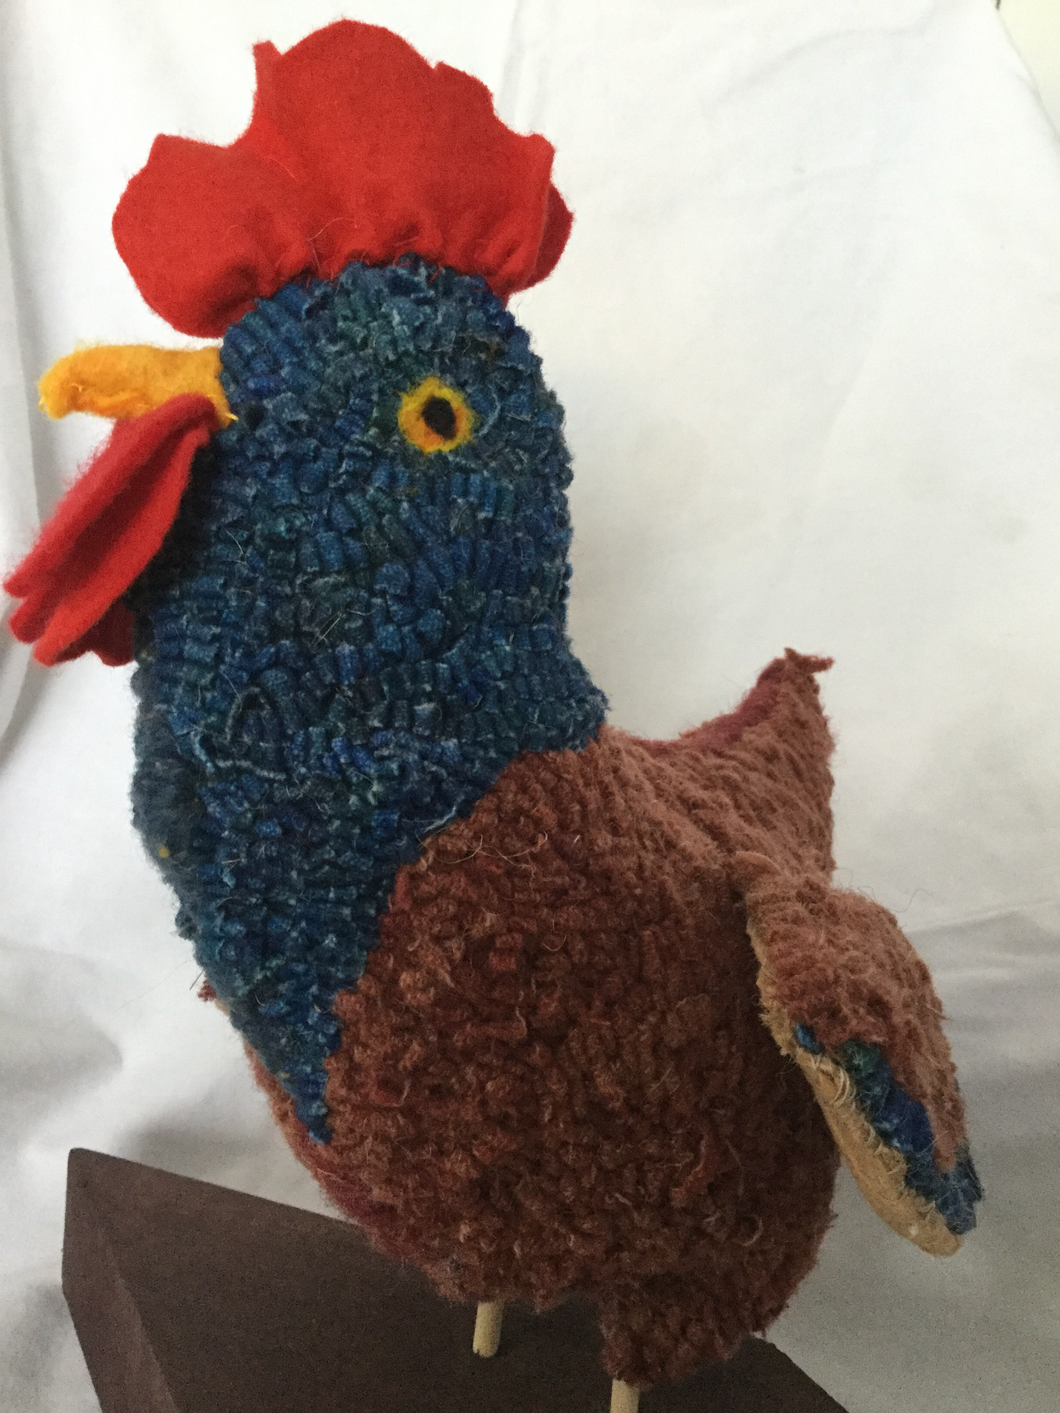 rug hooked hen sculpture with blue head and brown body. Sculpture is mounted on a wooden base